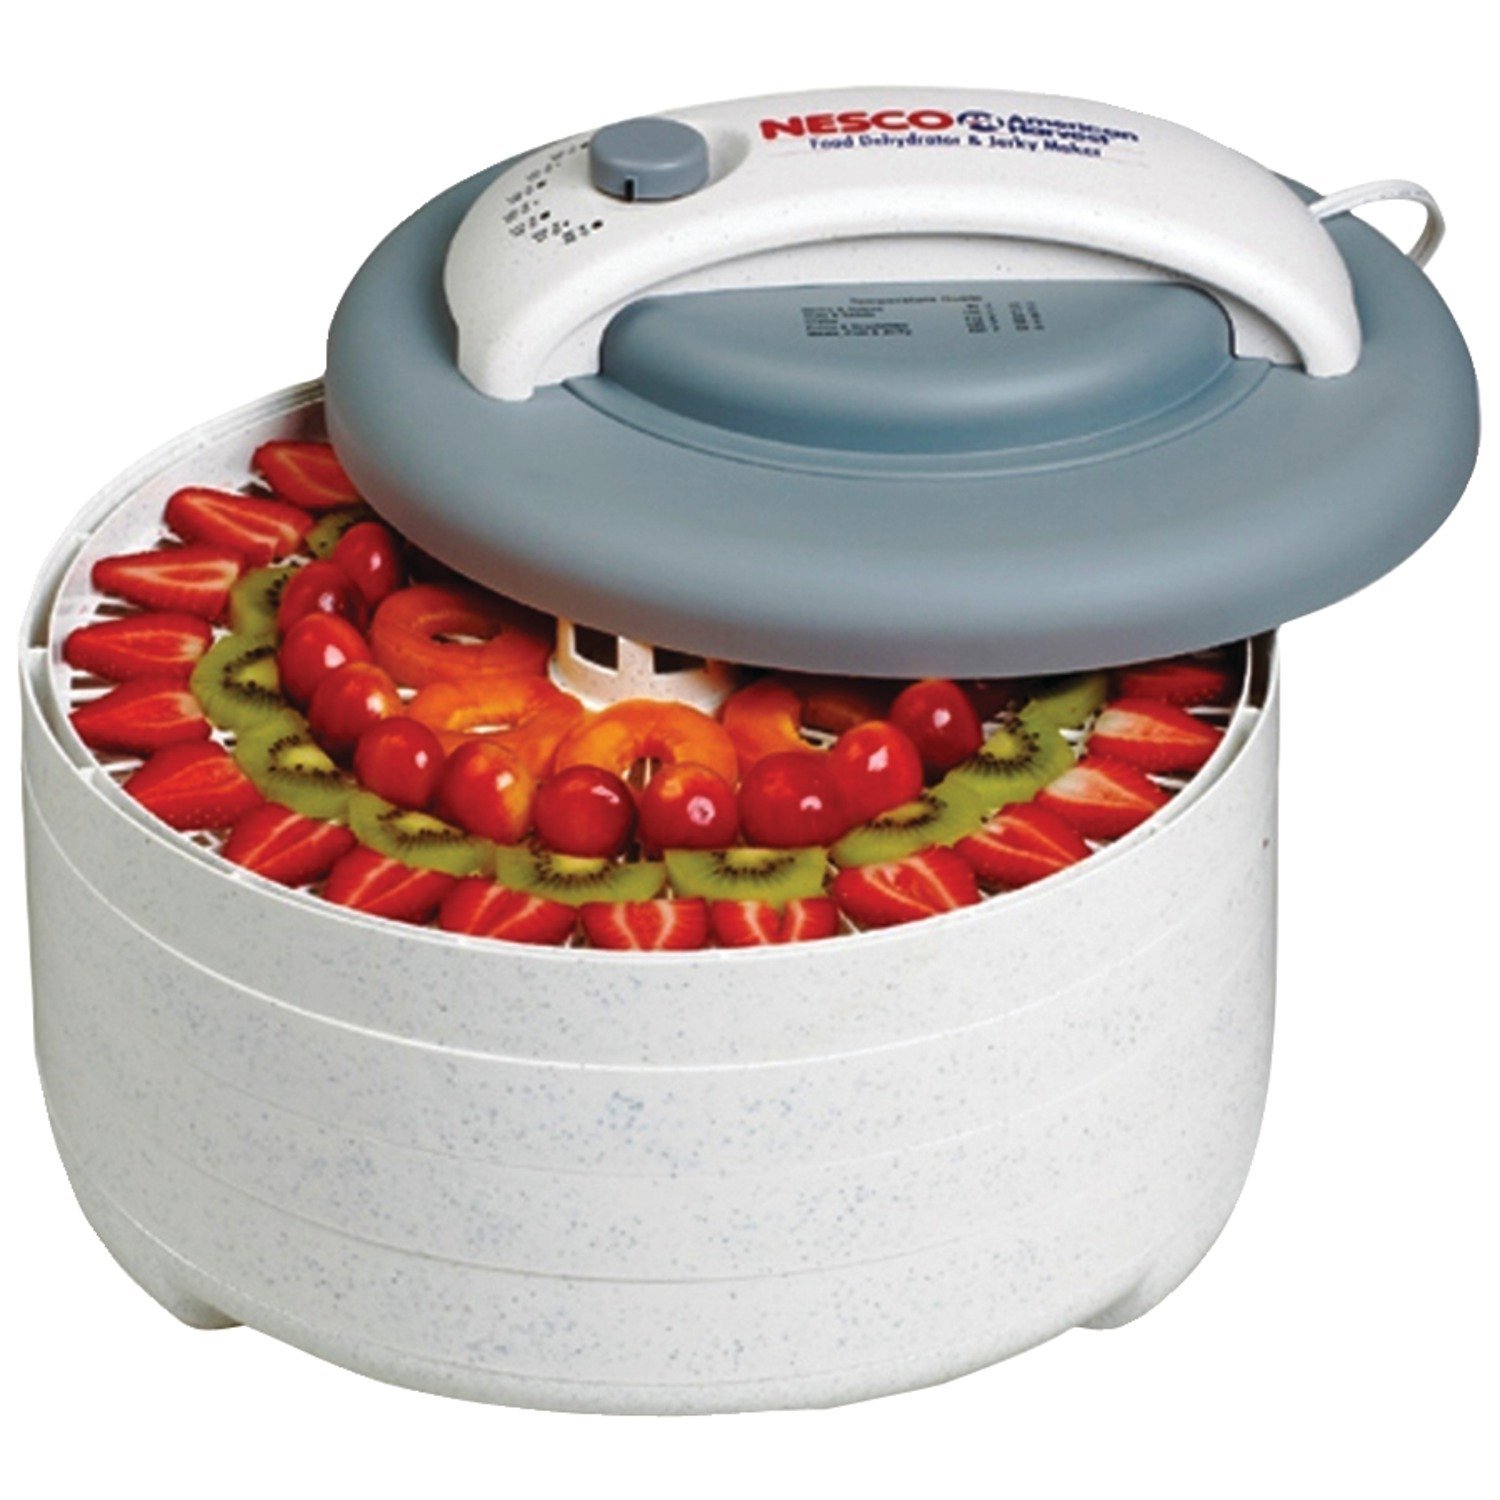 Picture of Nesco FD-61 Food Dehydrator - 4 Trays & Fruit Roll Sheet - NO SPICES